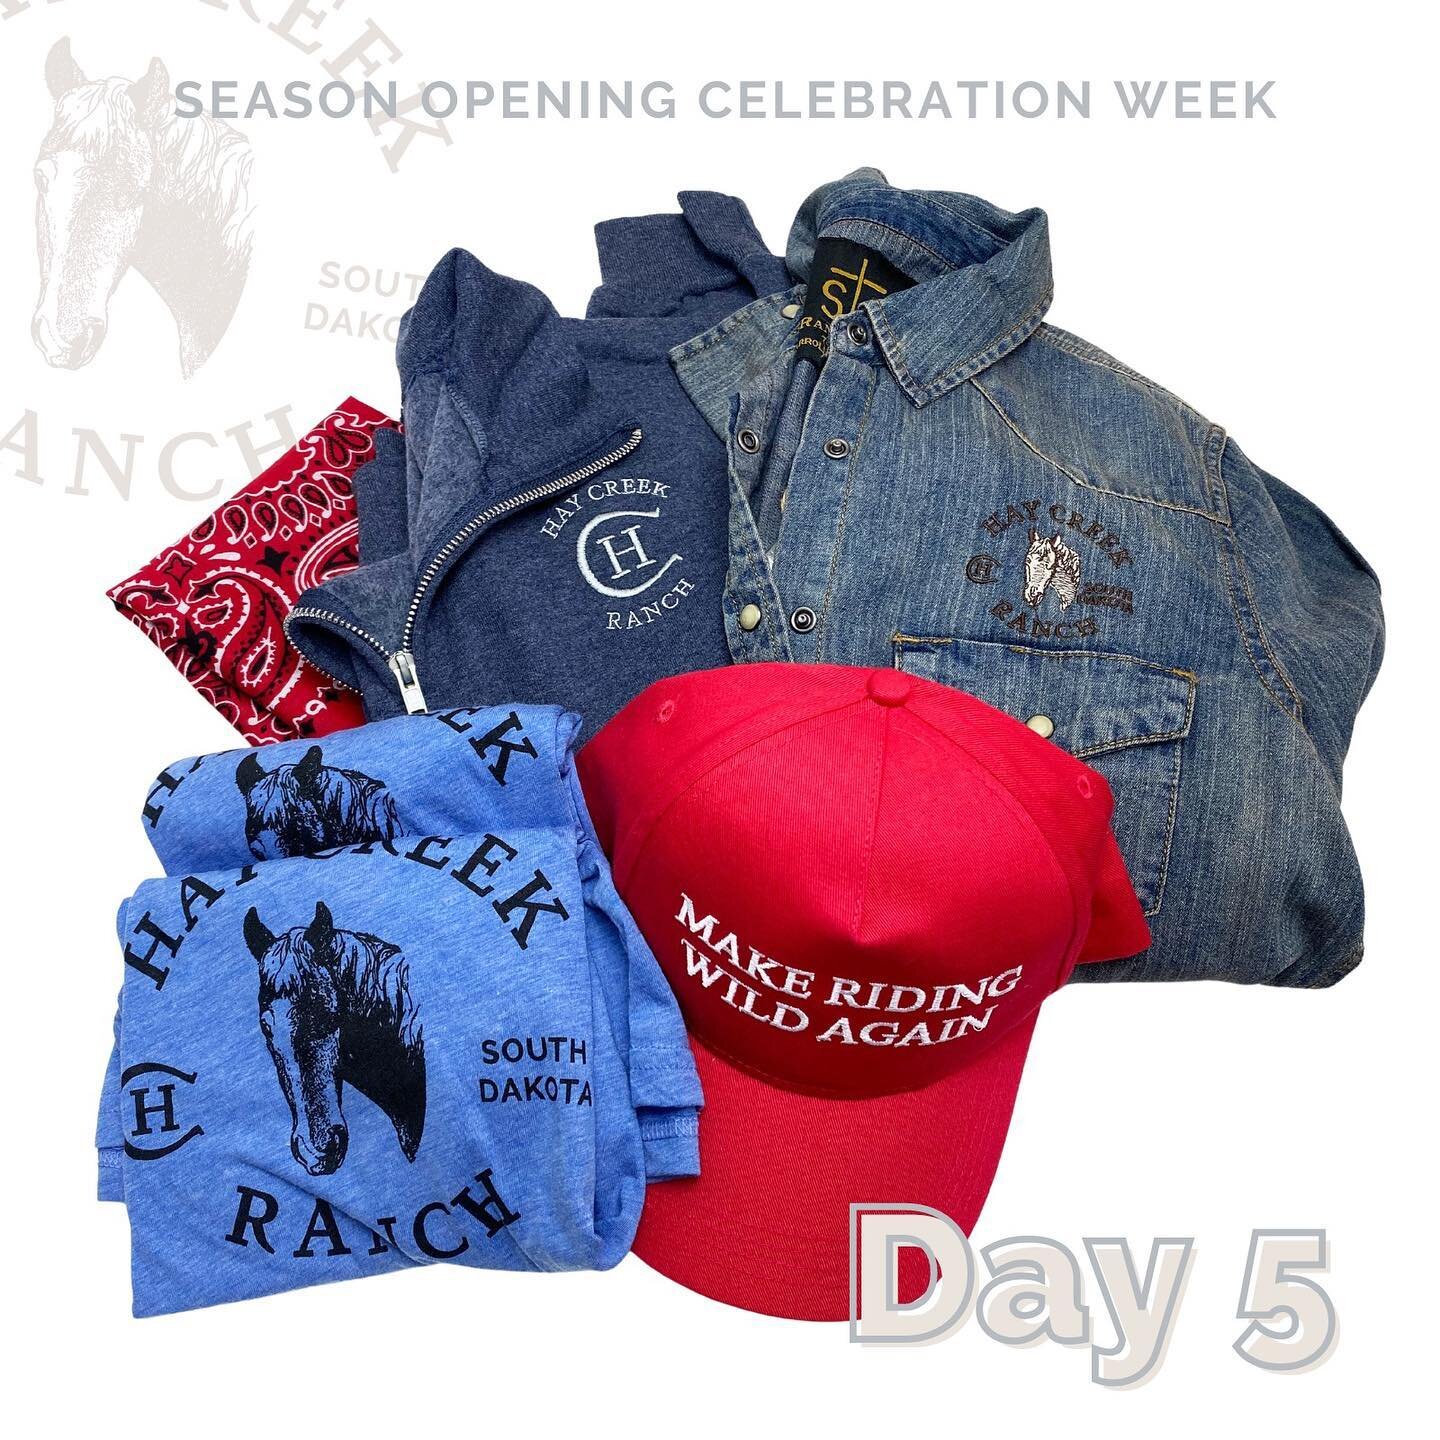 We've been giving away goodies all week to celebrate opening for the 2023 season on Monday, May 22!

Today's giveaway is a merch basket with:

➡️ STS Ranchwear Women's Claira Denim Shirt - Size Medum (this shirt runs small)
➡️ Unisex 1/4 Zip Sweatshi